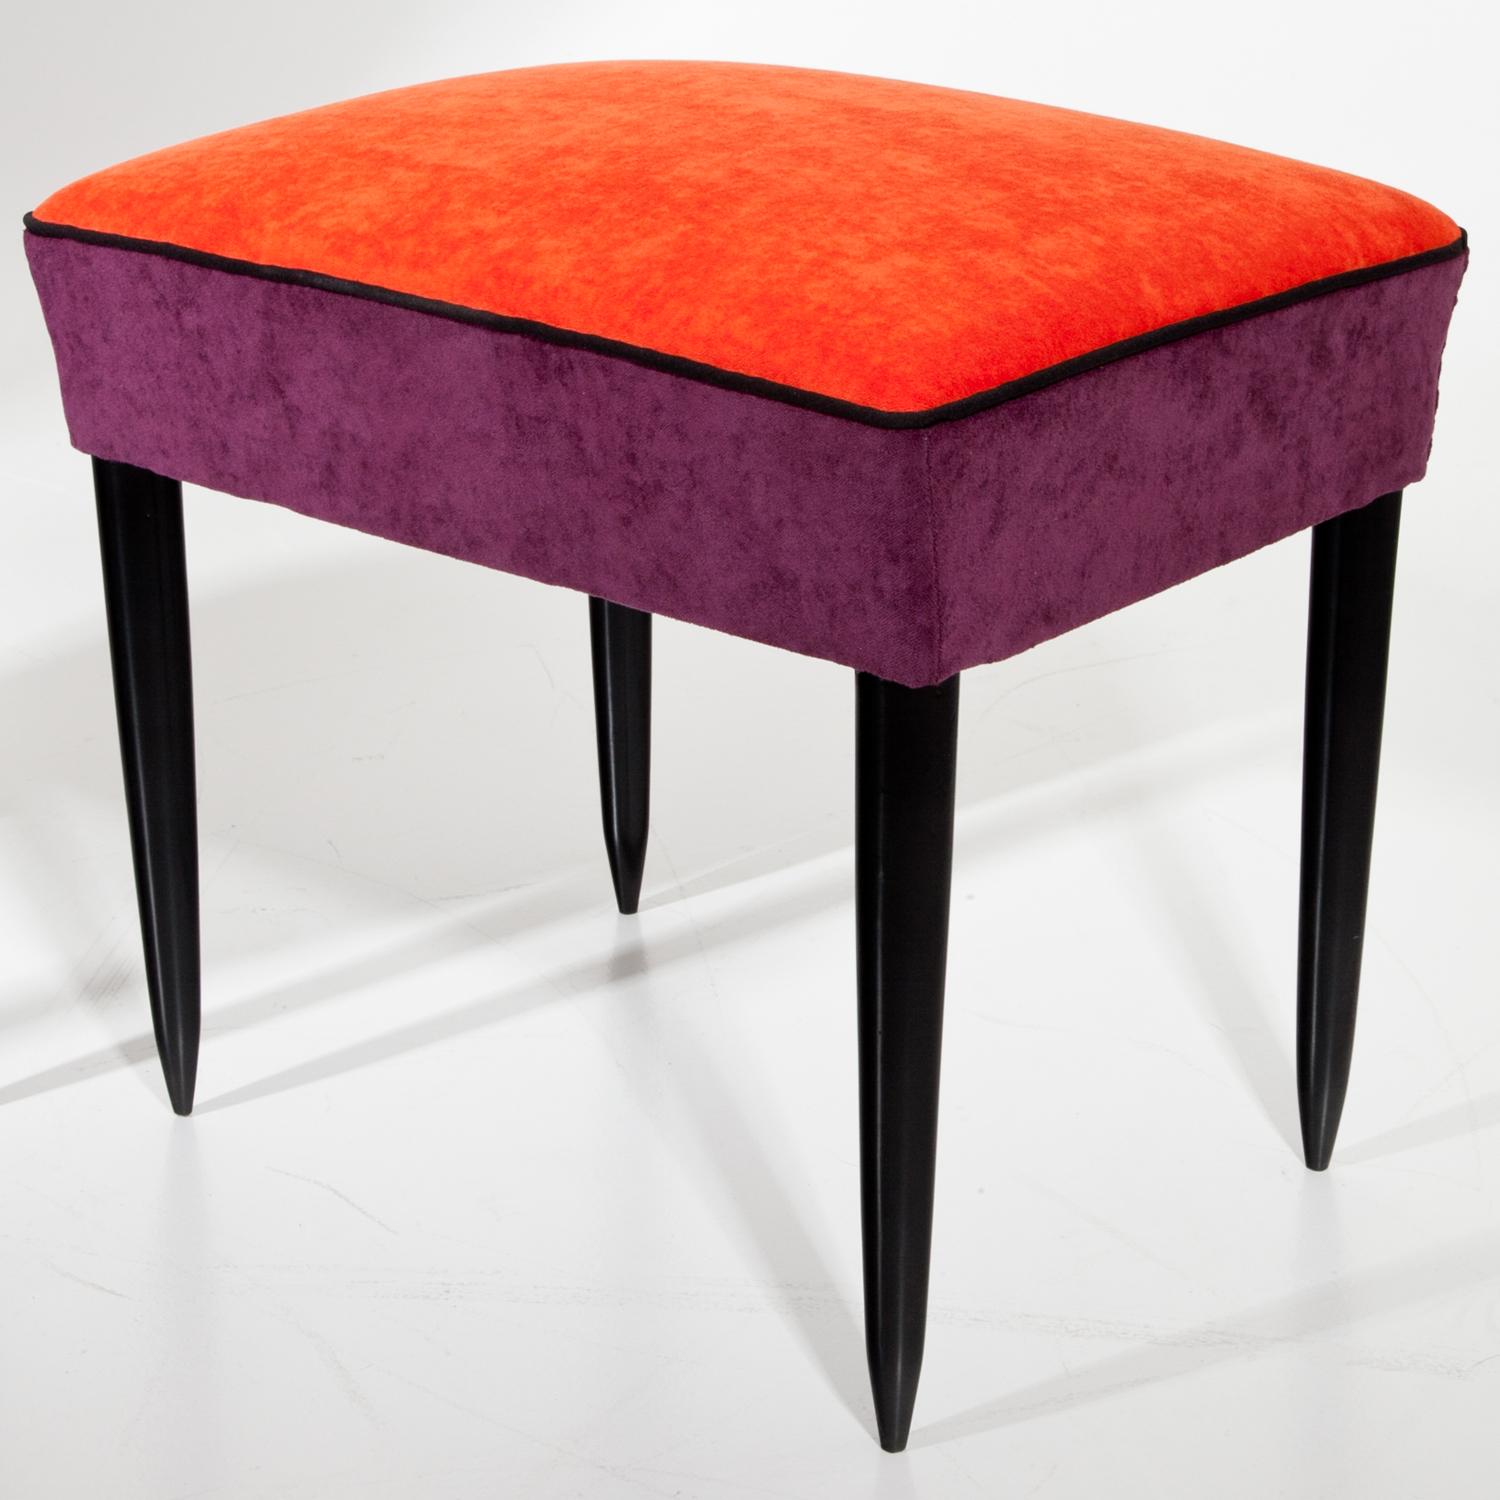 Pair of stools standing on ebonized conical legs with rectangular seats. The stools were reupholstered with a velet-like fabric in purple and orange.